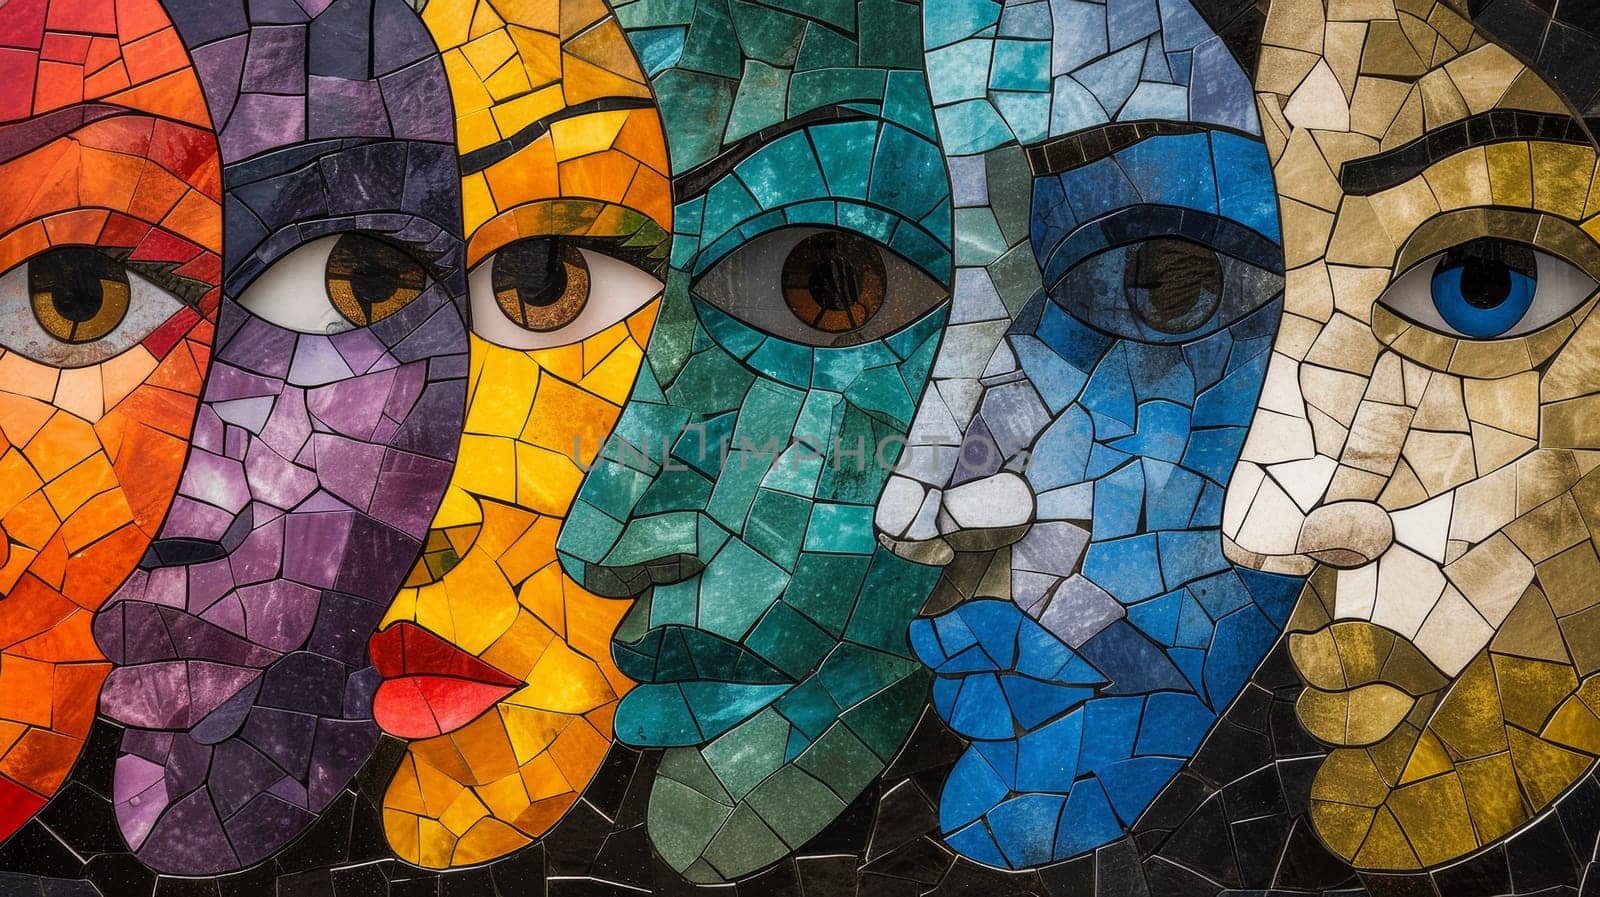 A mosaic of a group of faces painted in different colors